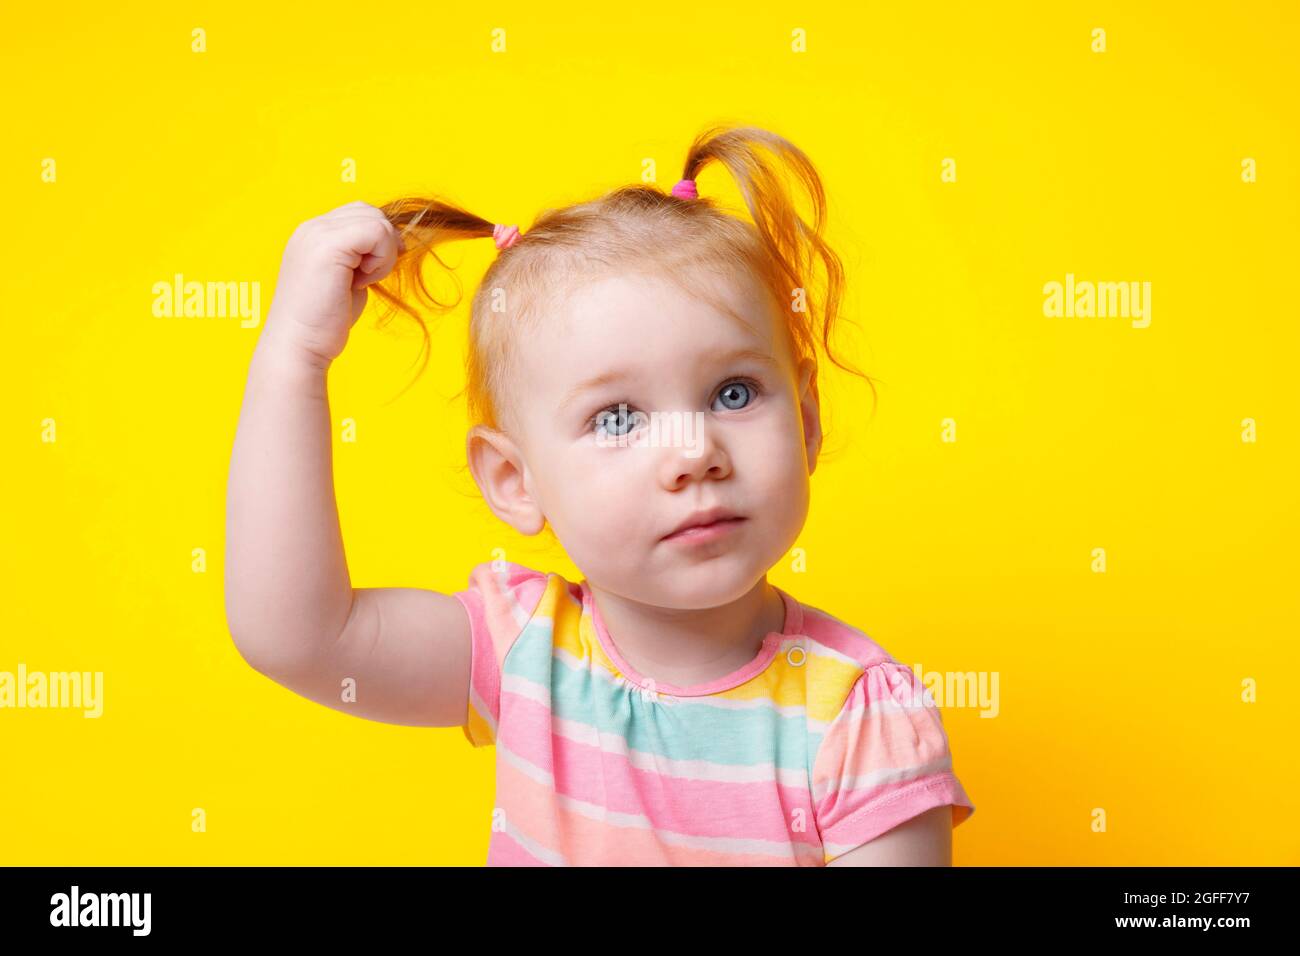 cute caucasian baby girl with ponytails over yellow background Stock Photo